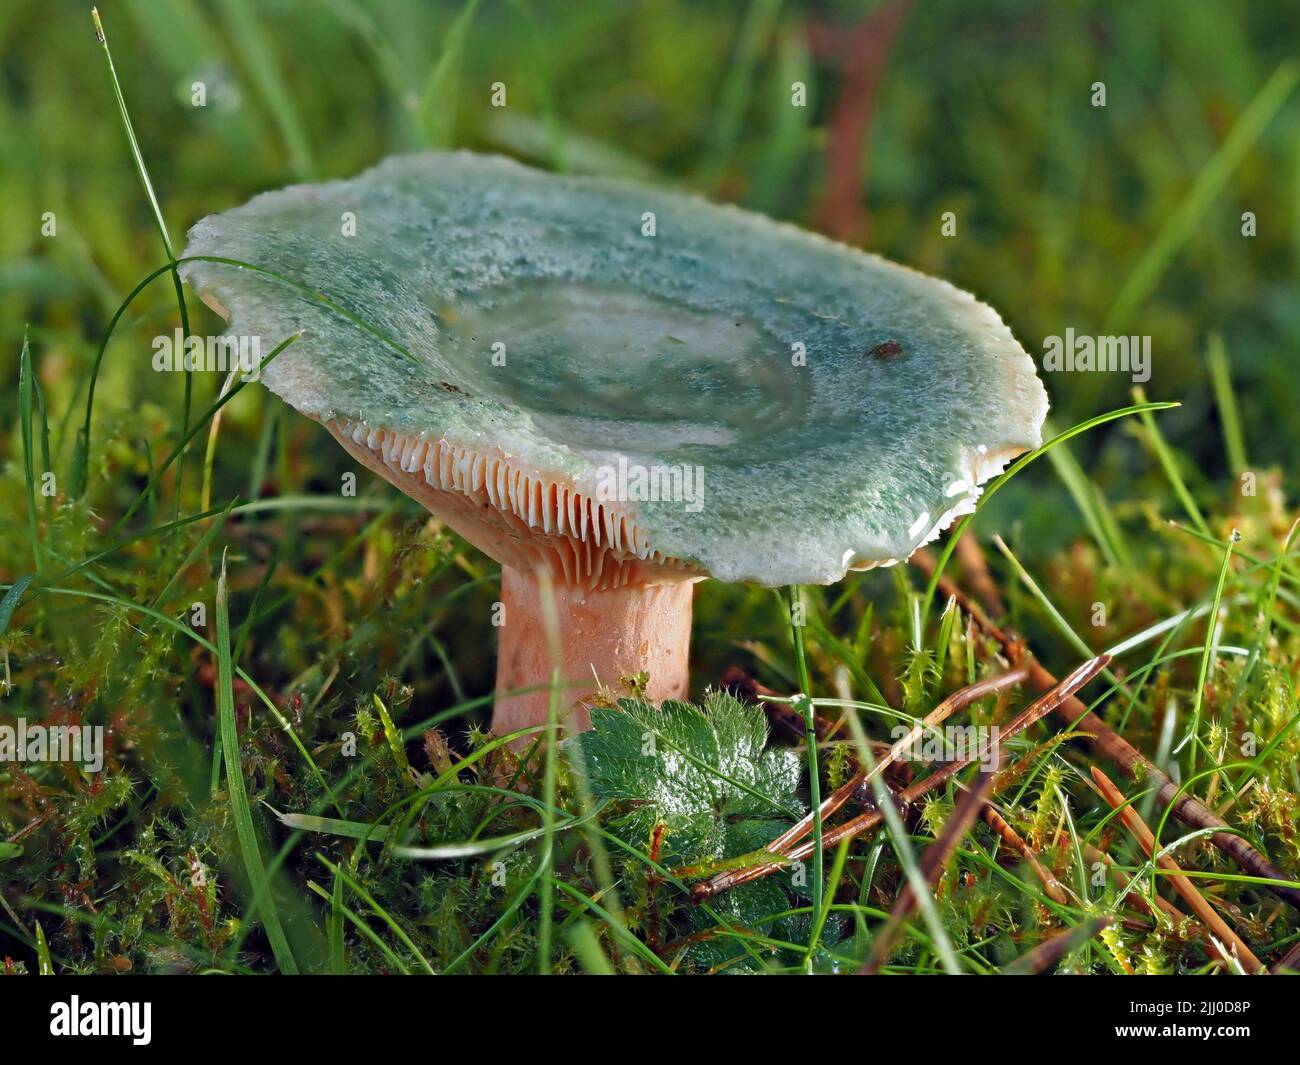 blue green cap of Charcoal burner mushroom (Russula cyanoxantha) with thick white stem growing in short grass below beech tree in Cumbria, England, UK Stock Photo